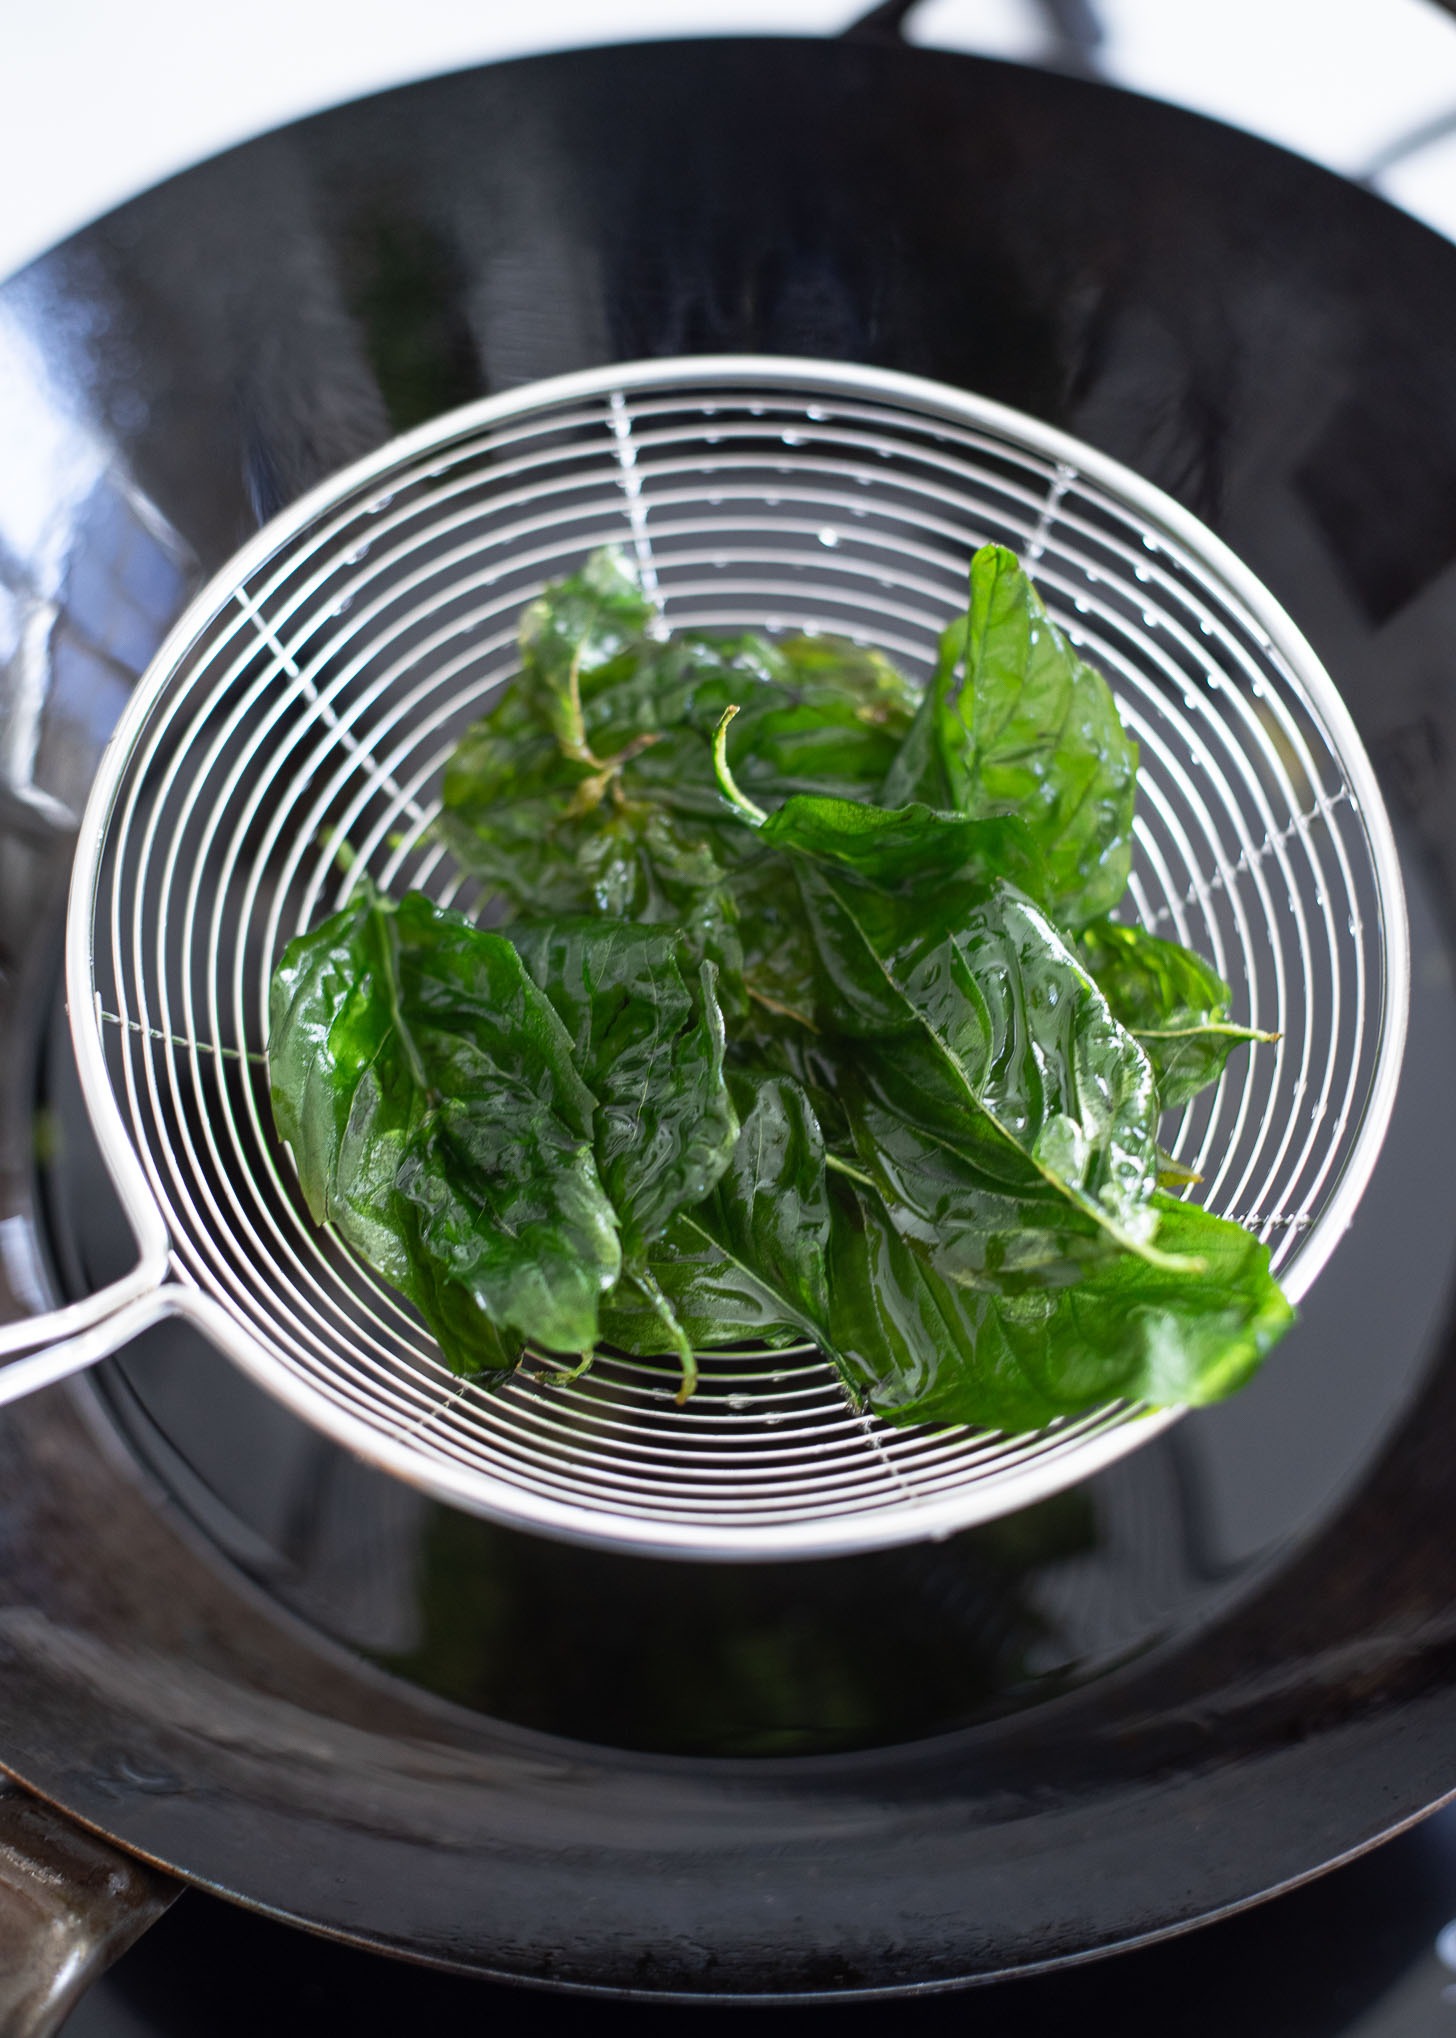 Deep fried Thai basil is showing the vibrant green color.